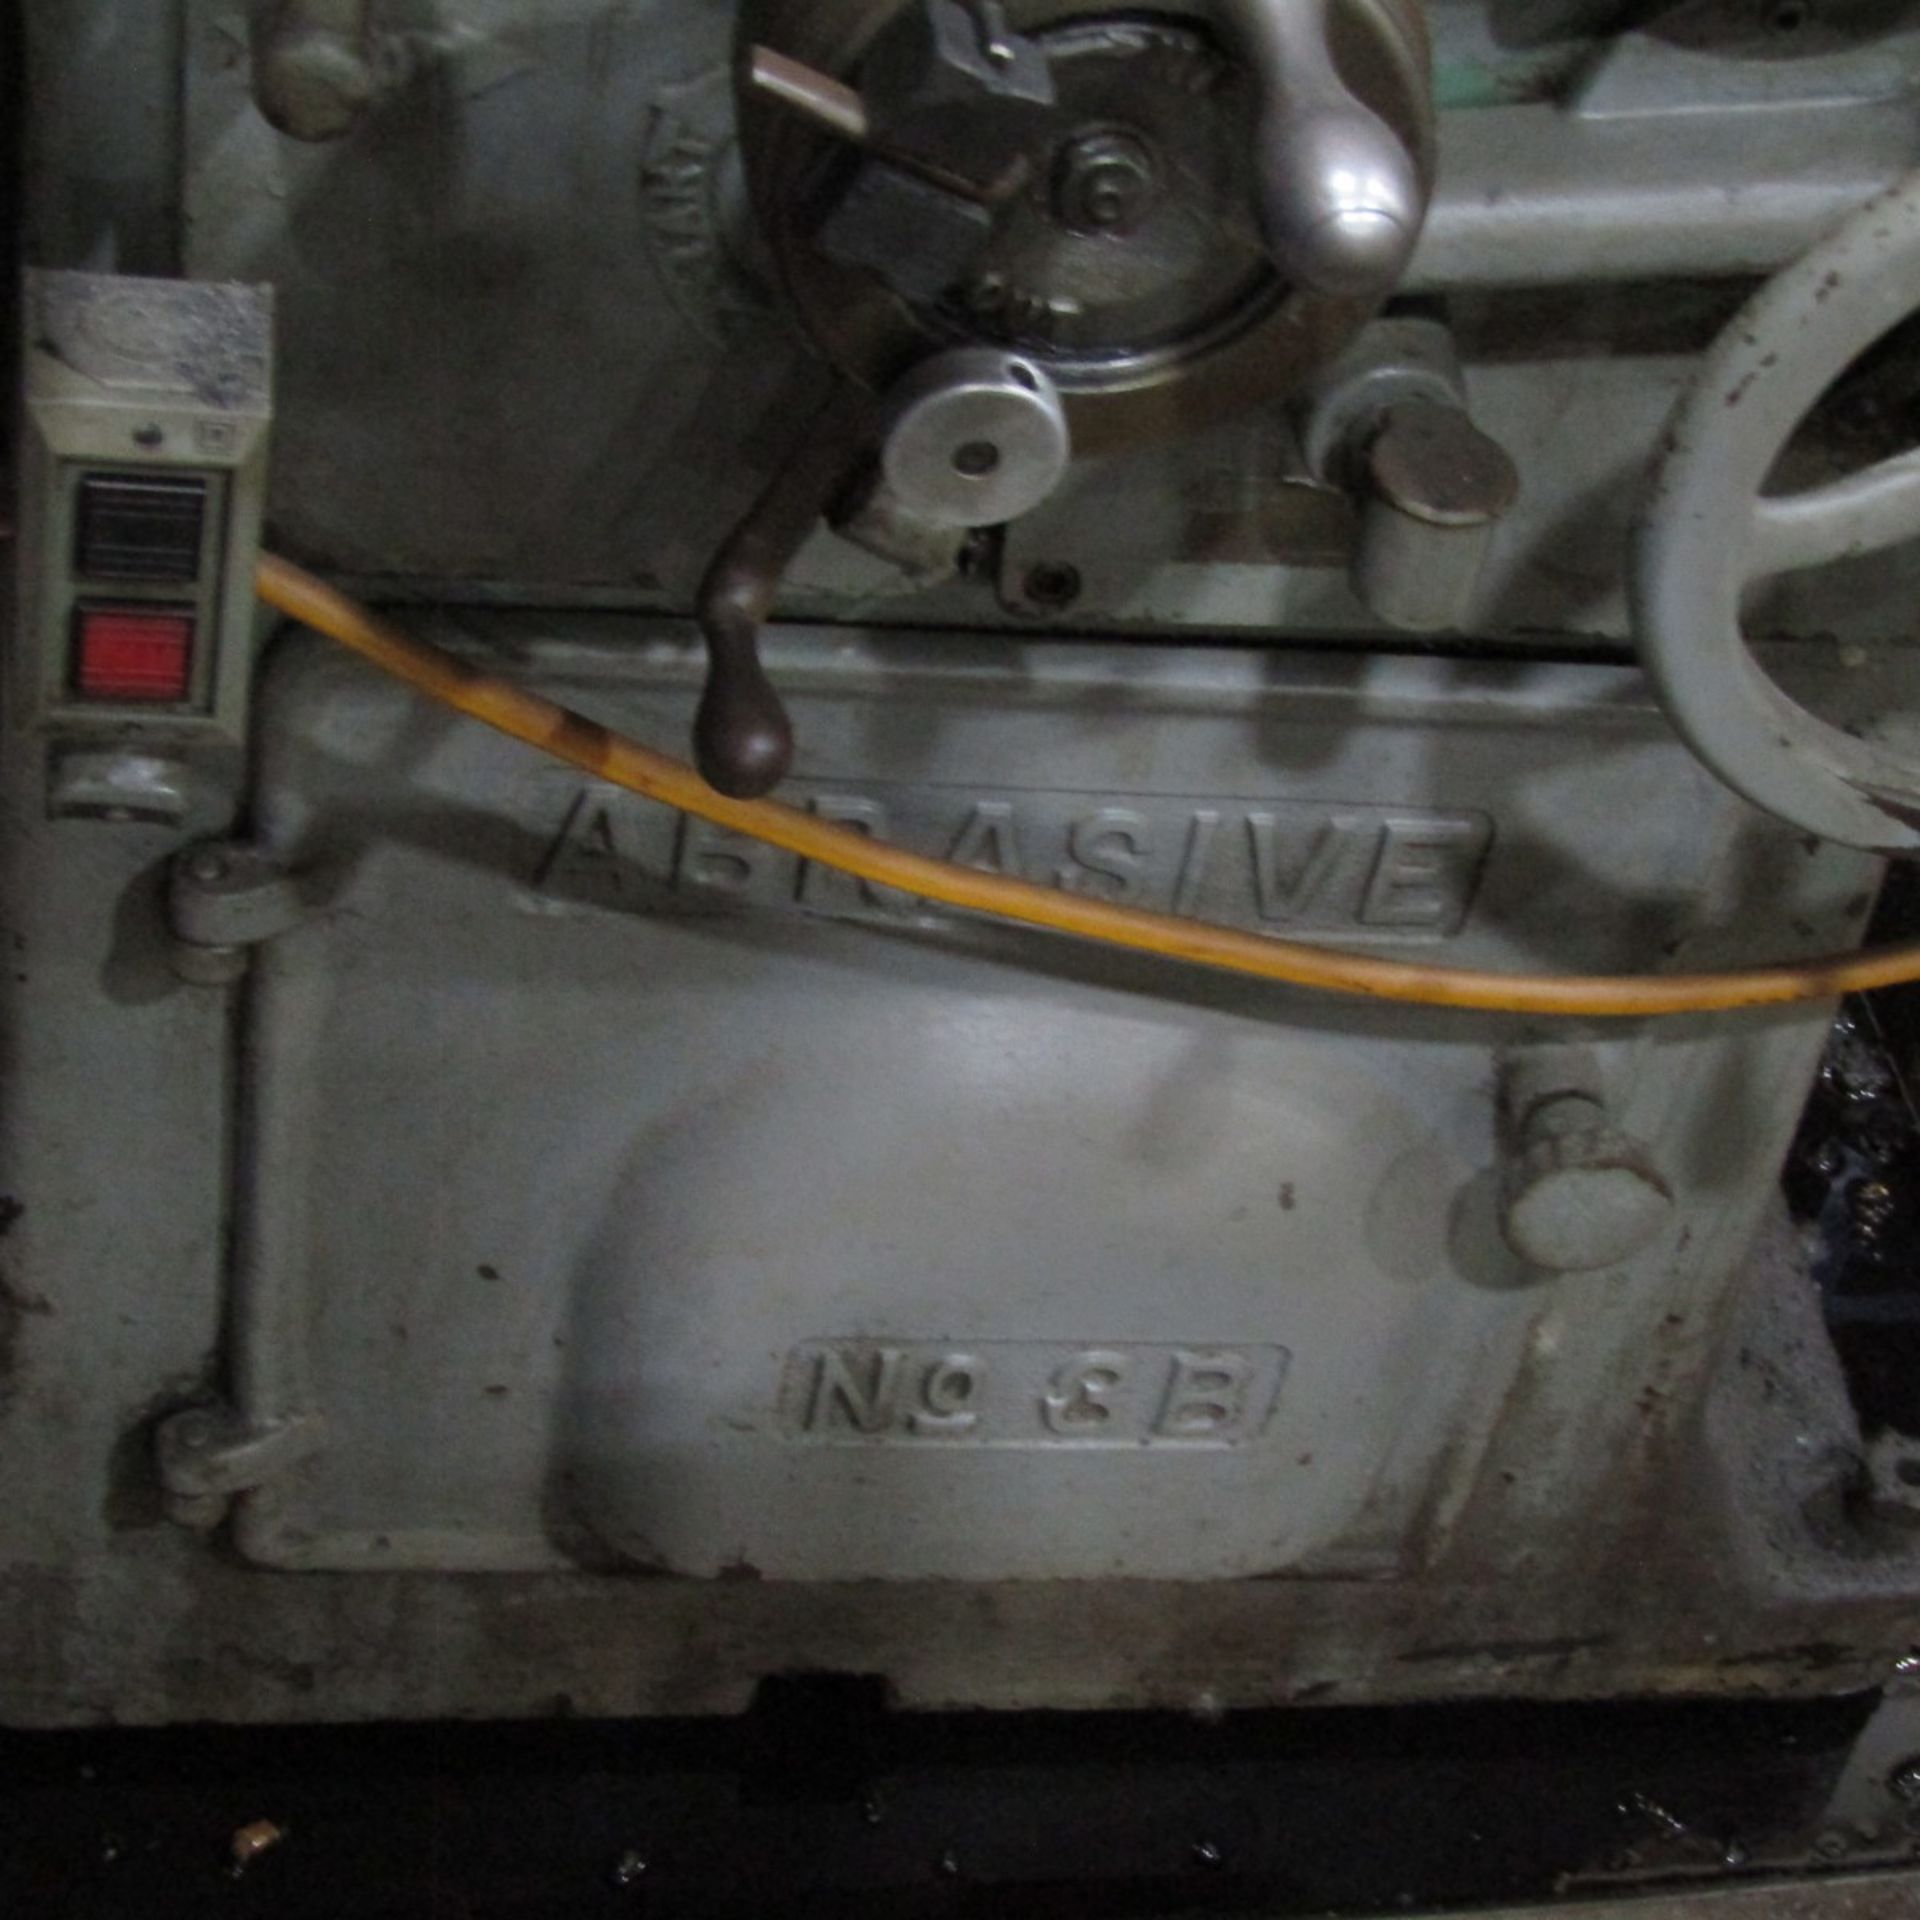 Abrasive 6 in. x 18 in. No. 3B Surface Grinder, S/N: 2062; with Coolant and Controls - Image 3 of 3